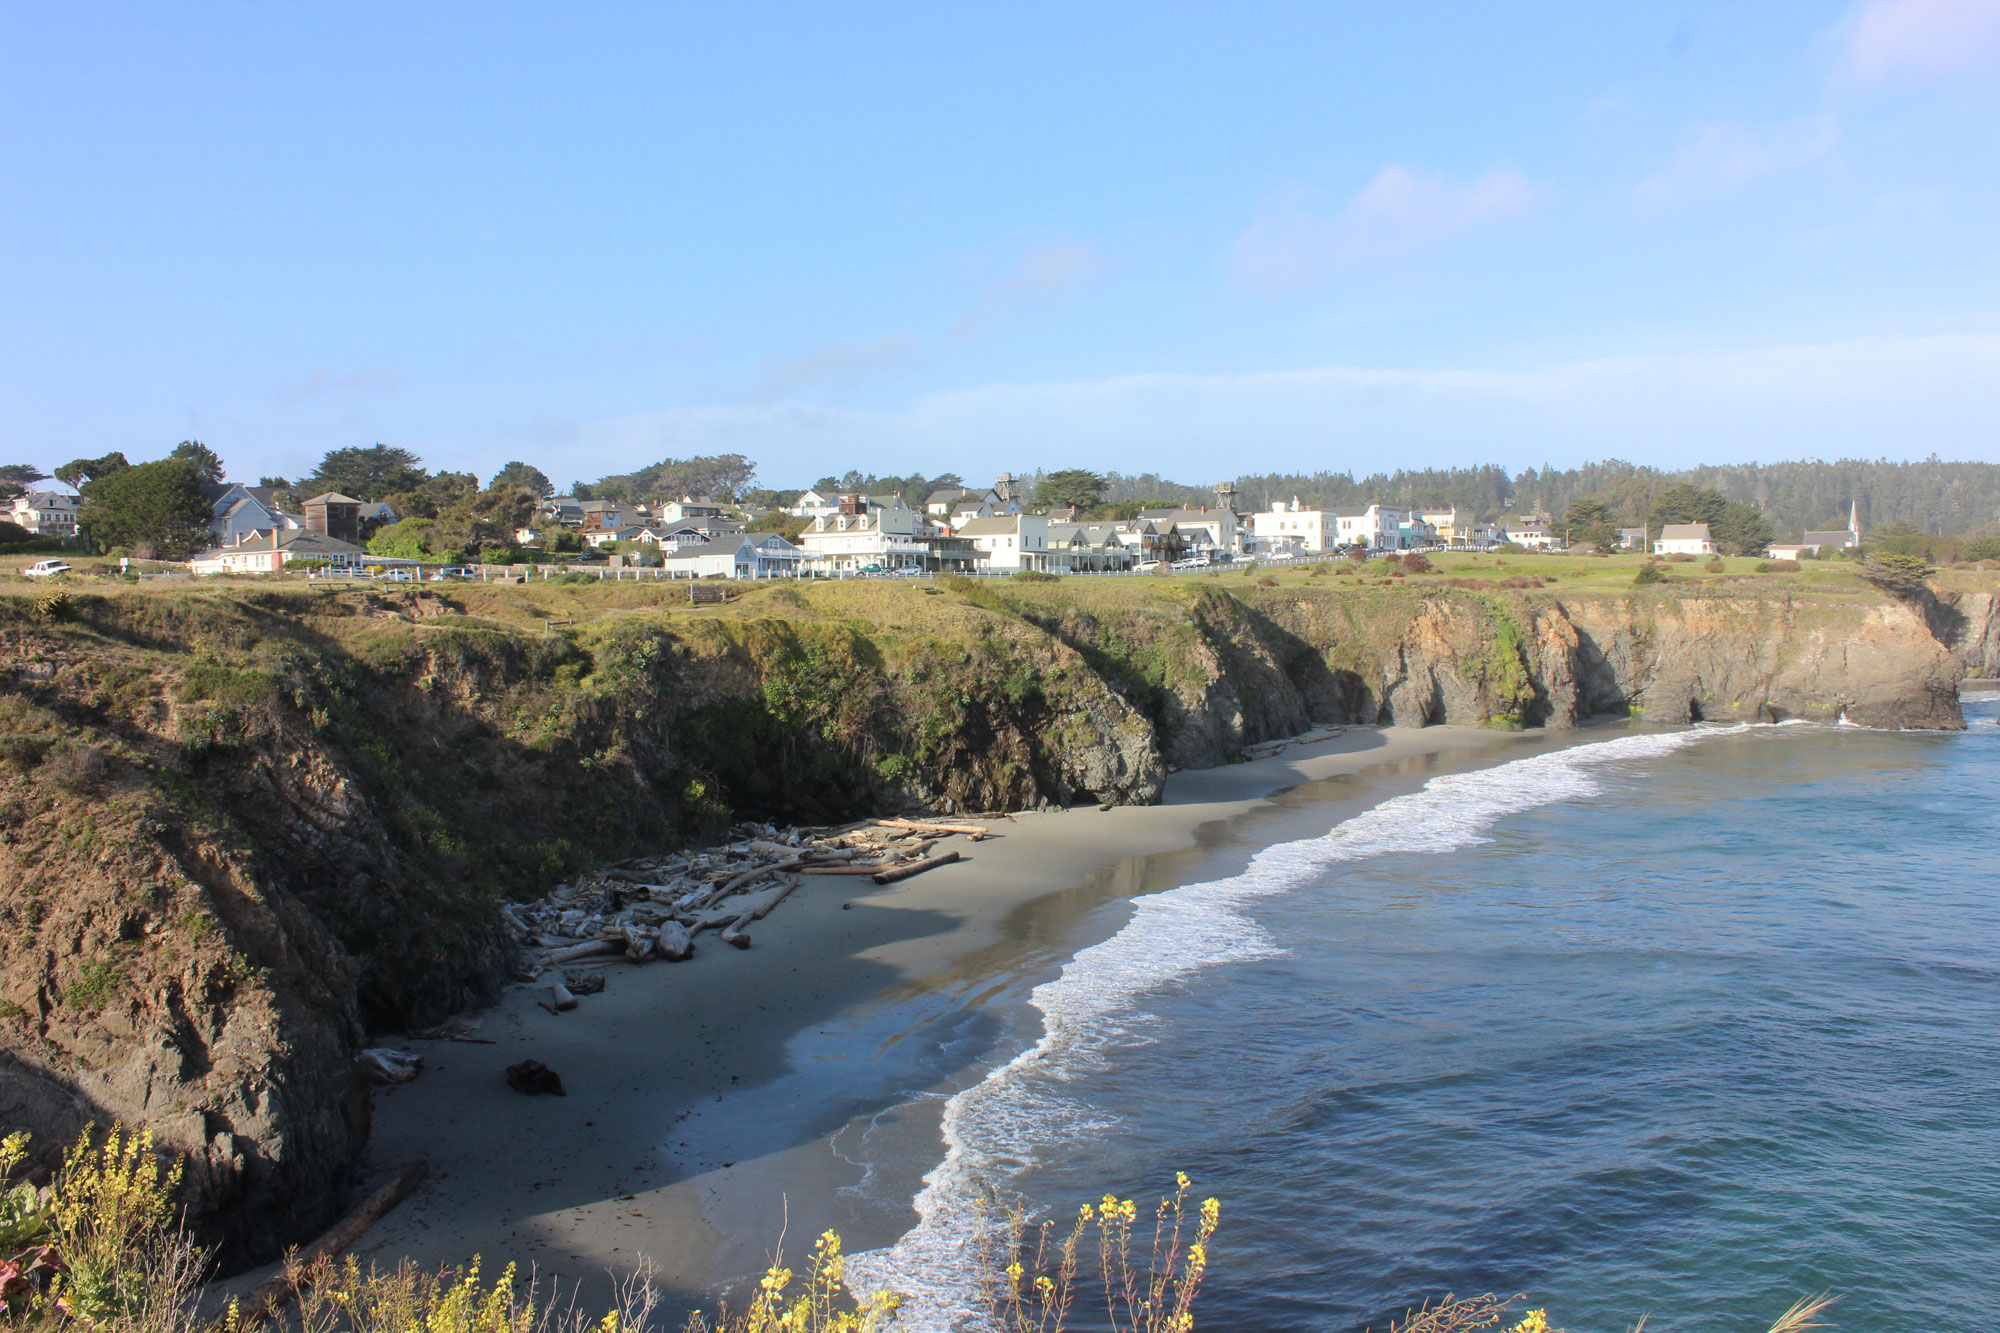 Photograph of Mendocino Village, California in 2015. The photo shows white buildings arranged on top of a low cliff along the ocean. In the foreground is a sandy beach at the base of the cliff.